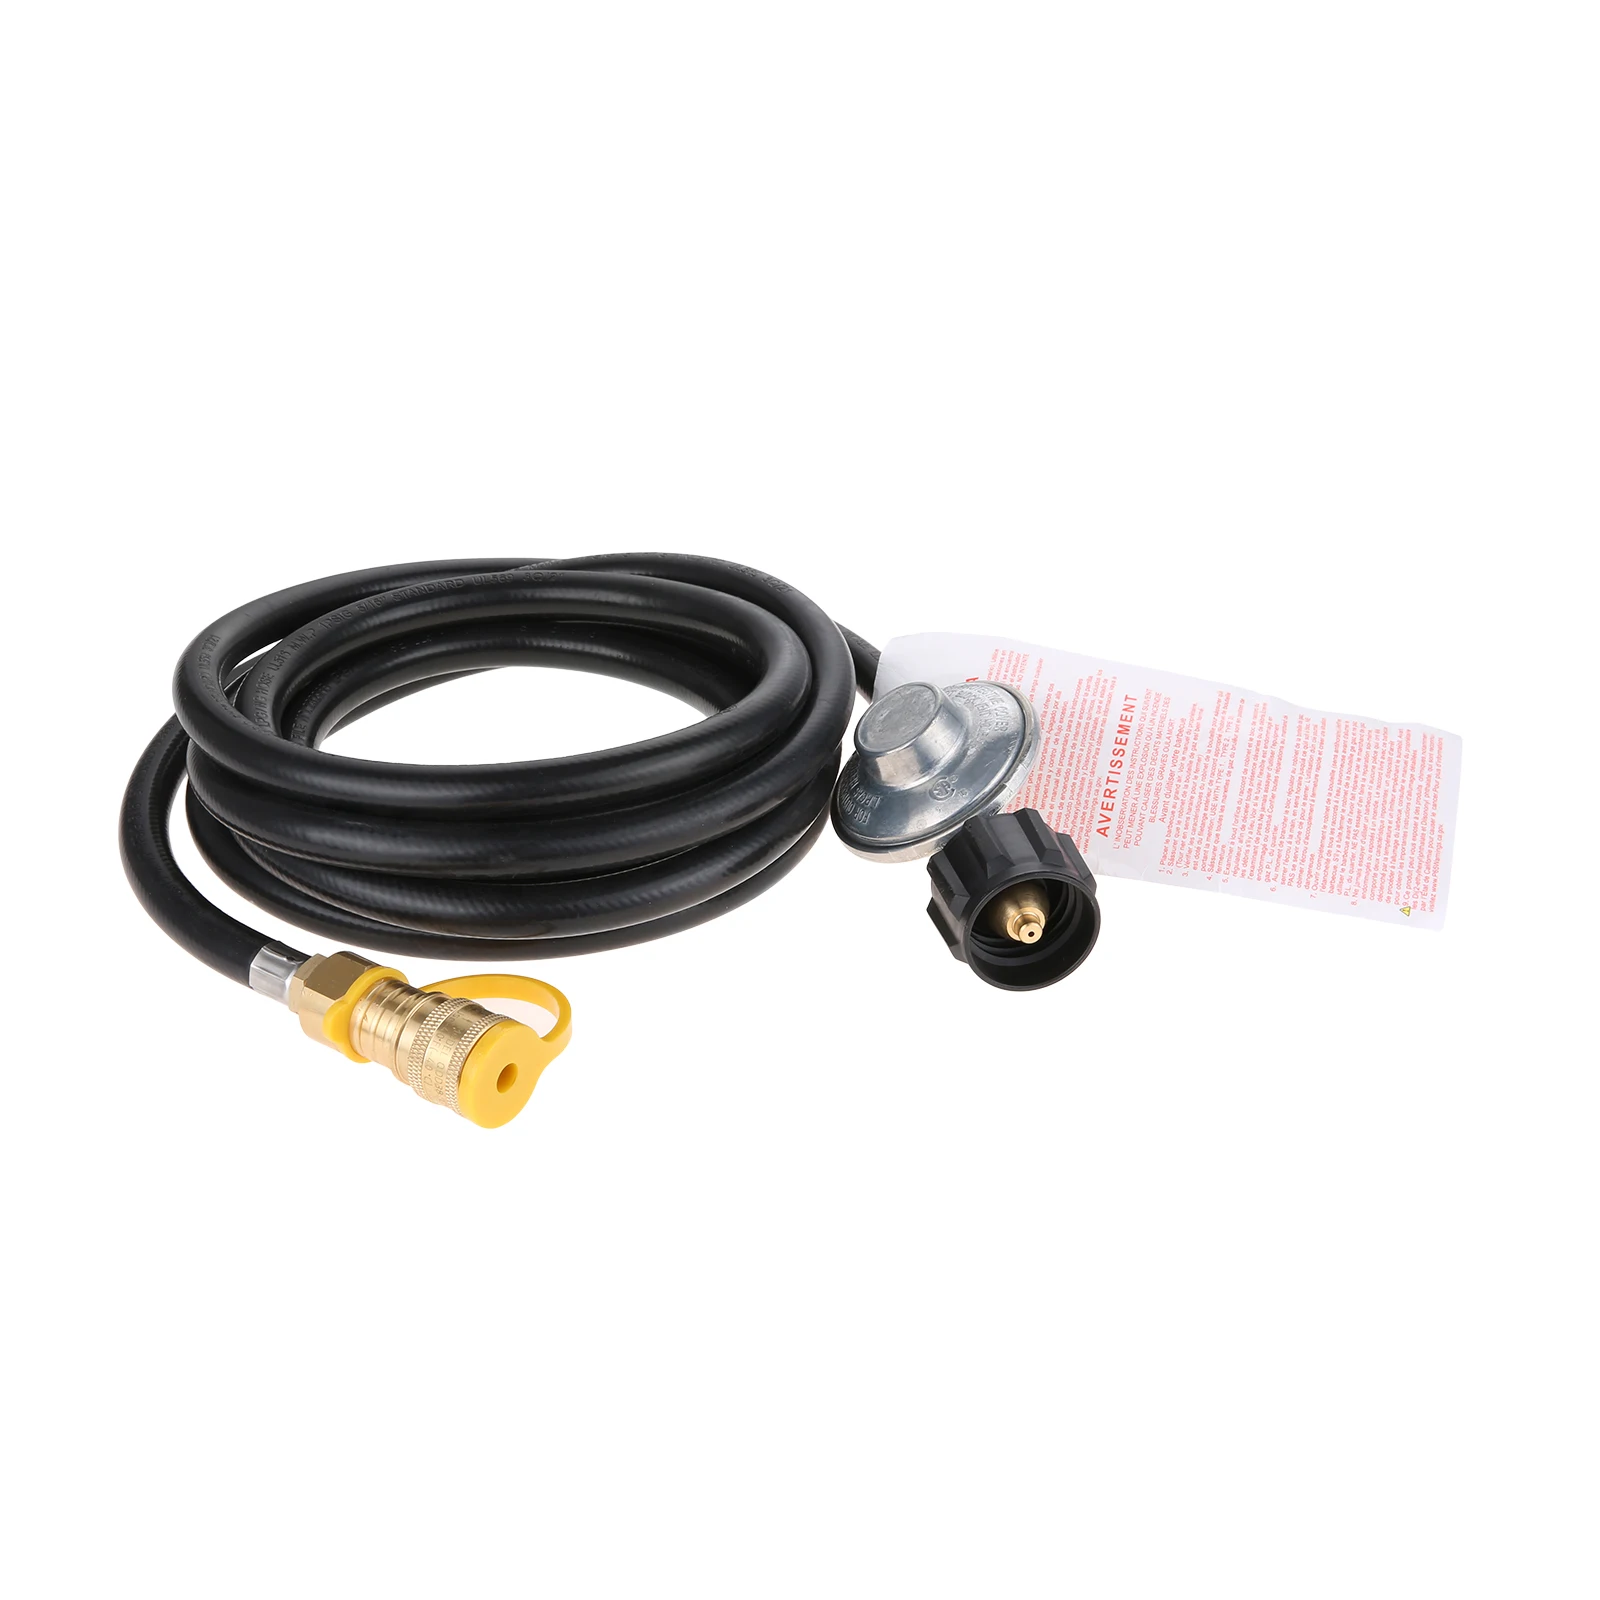 

12ft Propane Hose with Regulator 3/8 Quick Connect Disconnect for Mr Heater Grill Buddy Heater Indoor/Outdoor Type 1 Connection